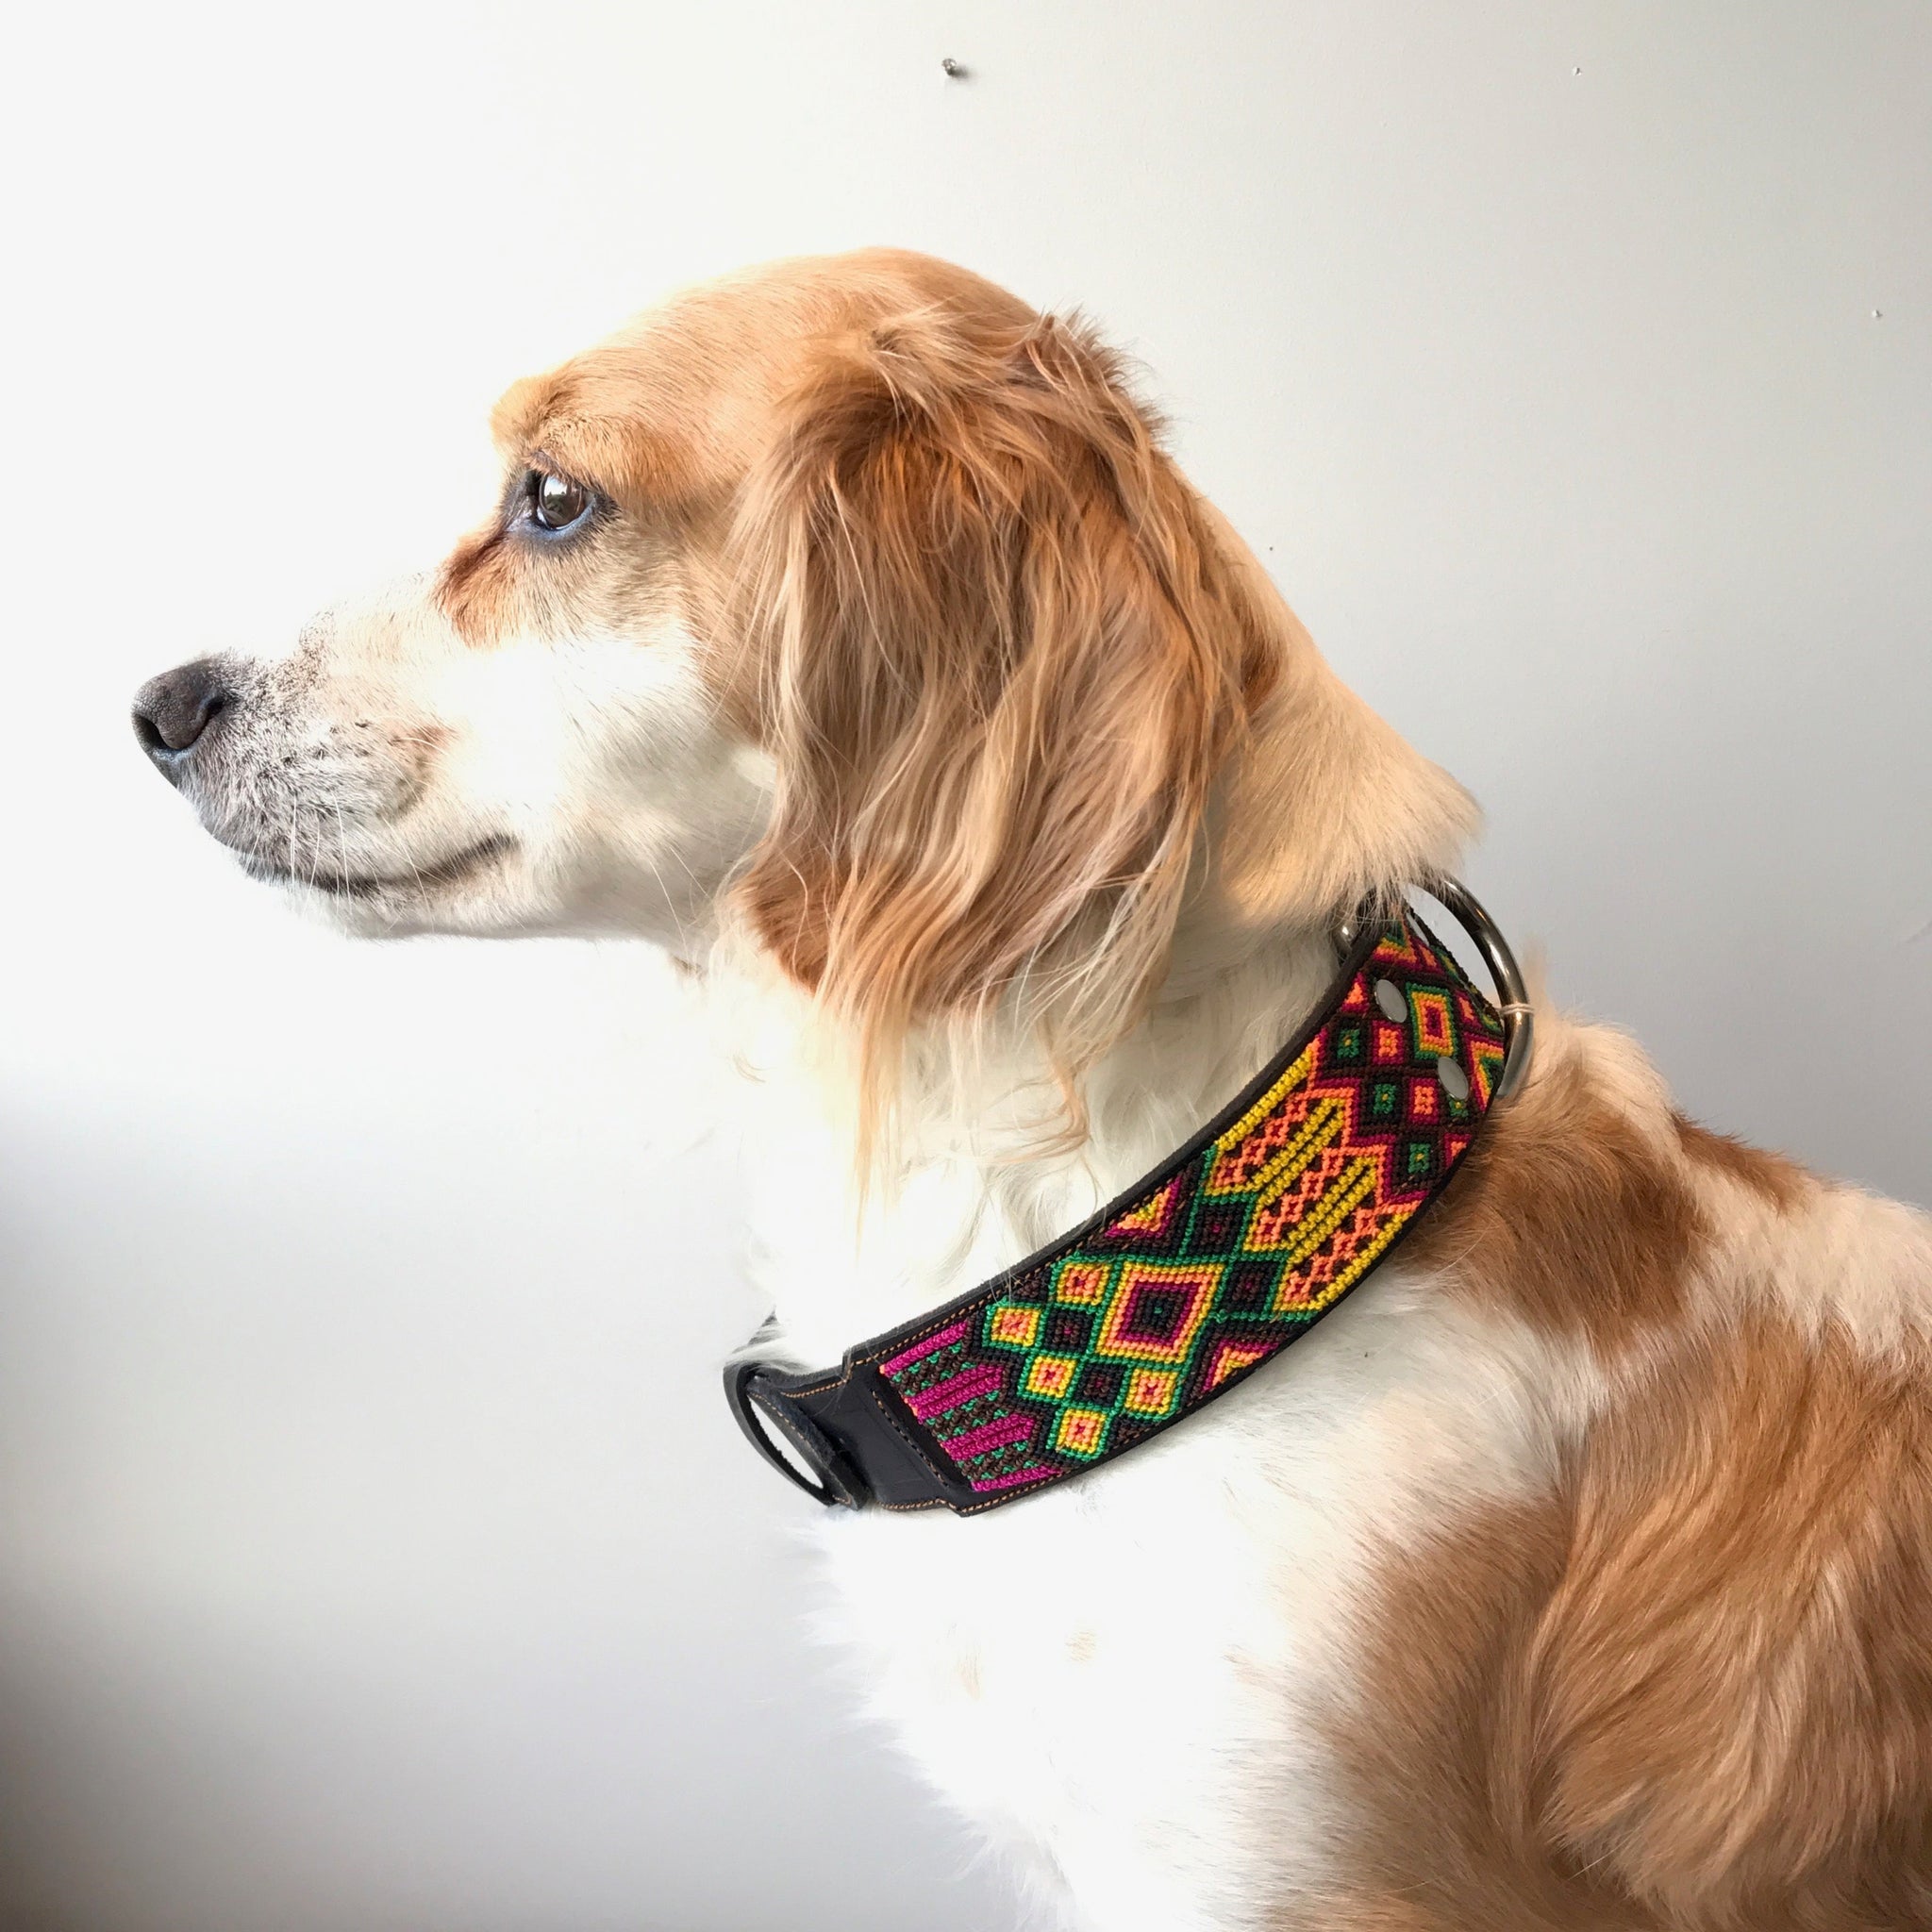 Leather and Macrame dog collar from Chiapas